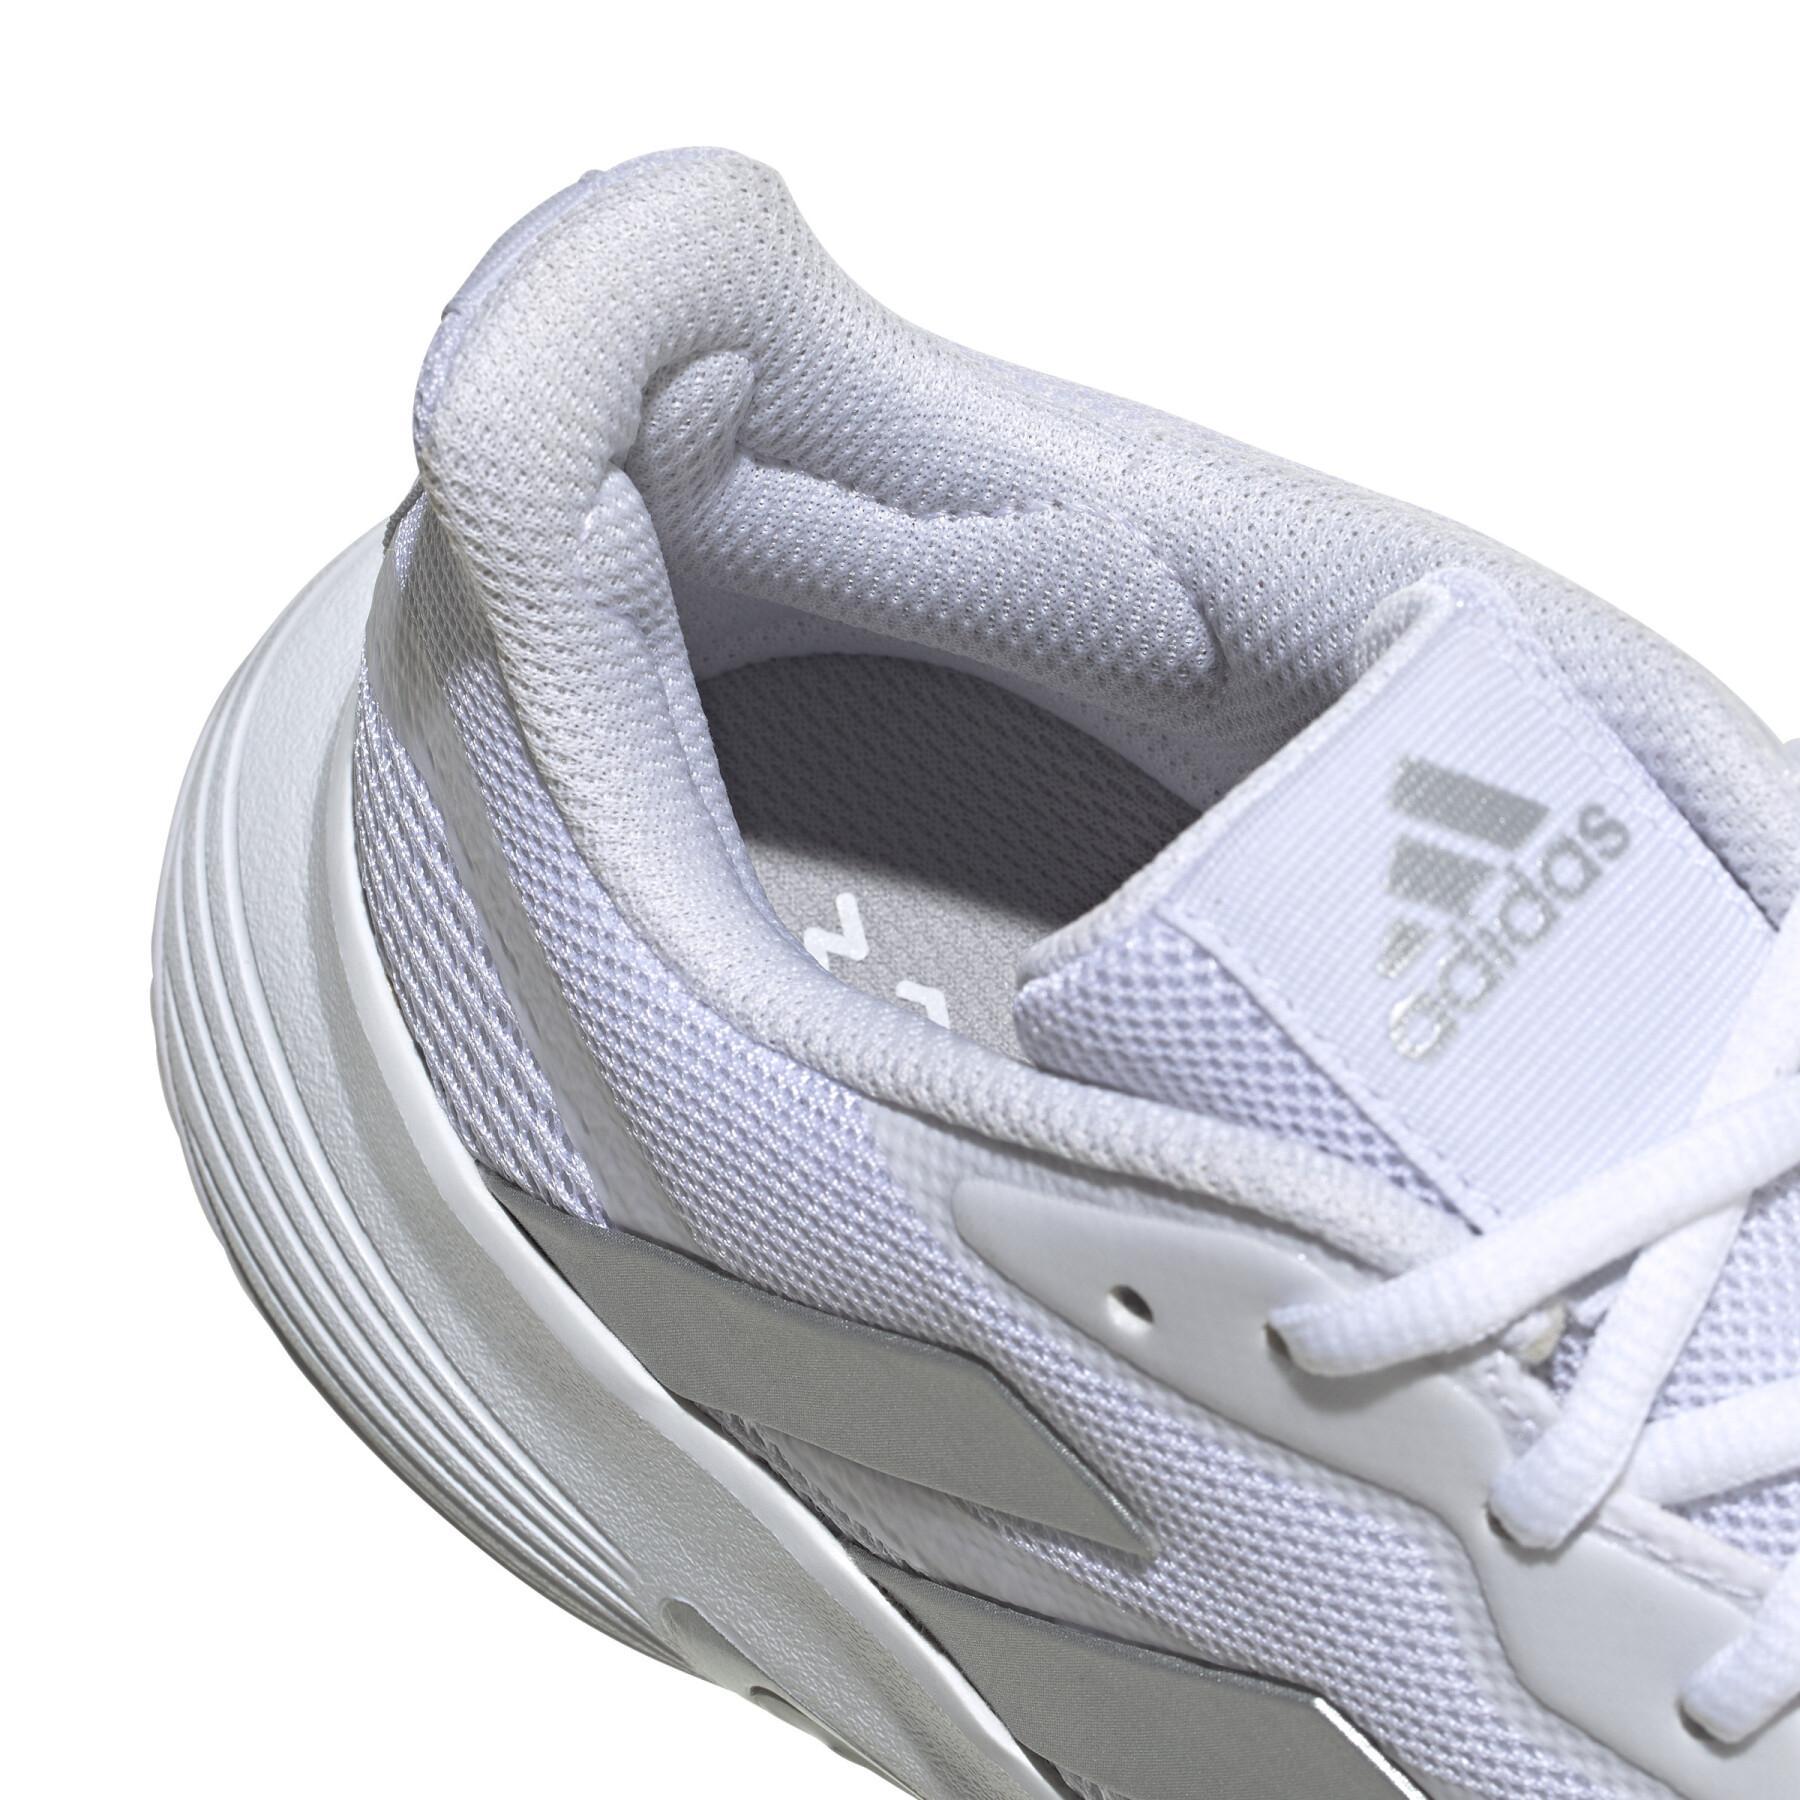 Chaussures femme adidas Courtjam Control